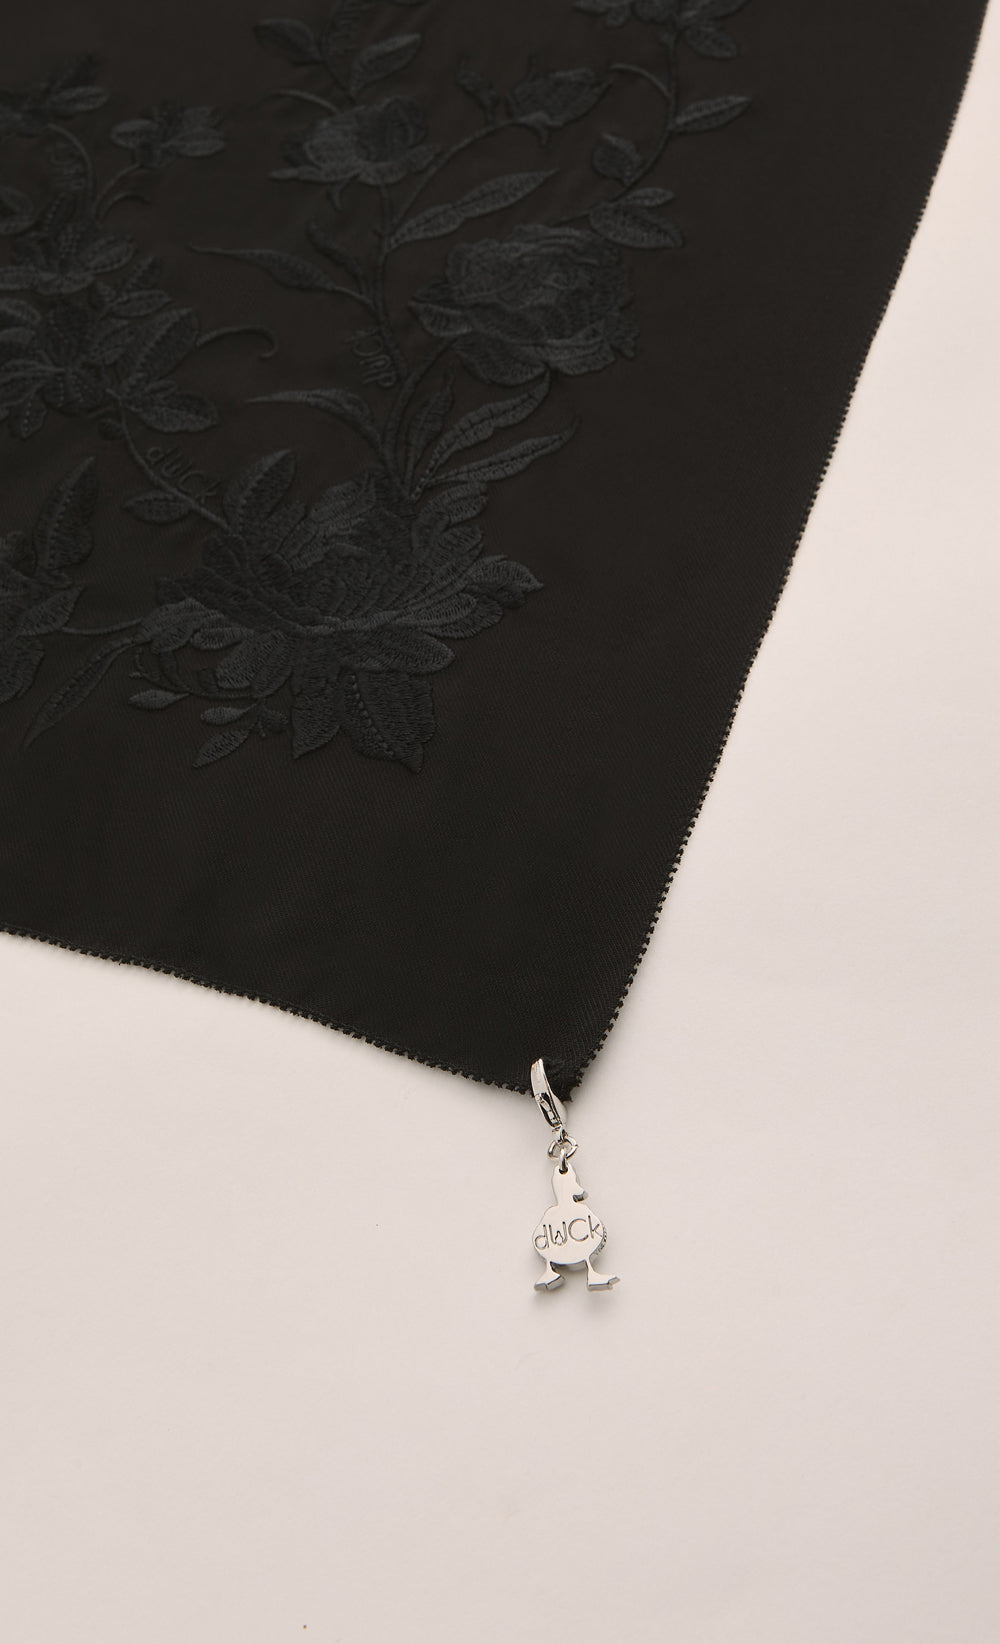 The Peonies Embroidery dUCk Square Scarf in Black